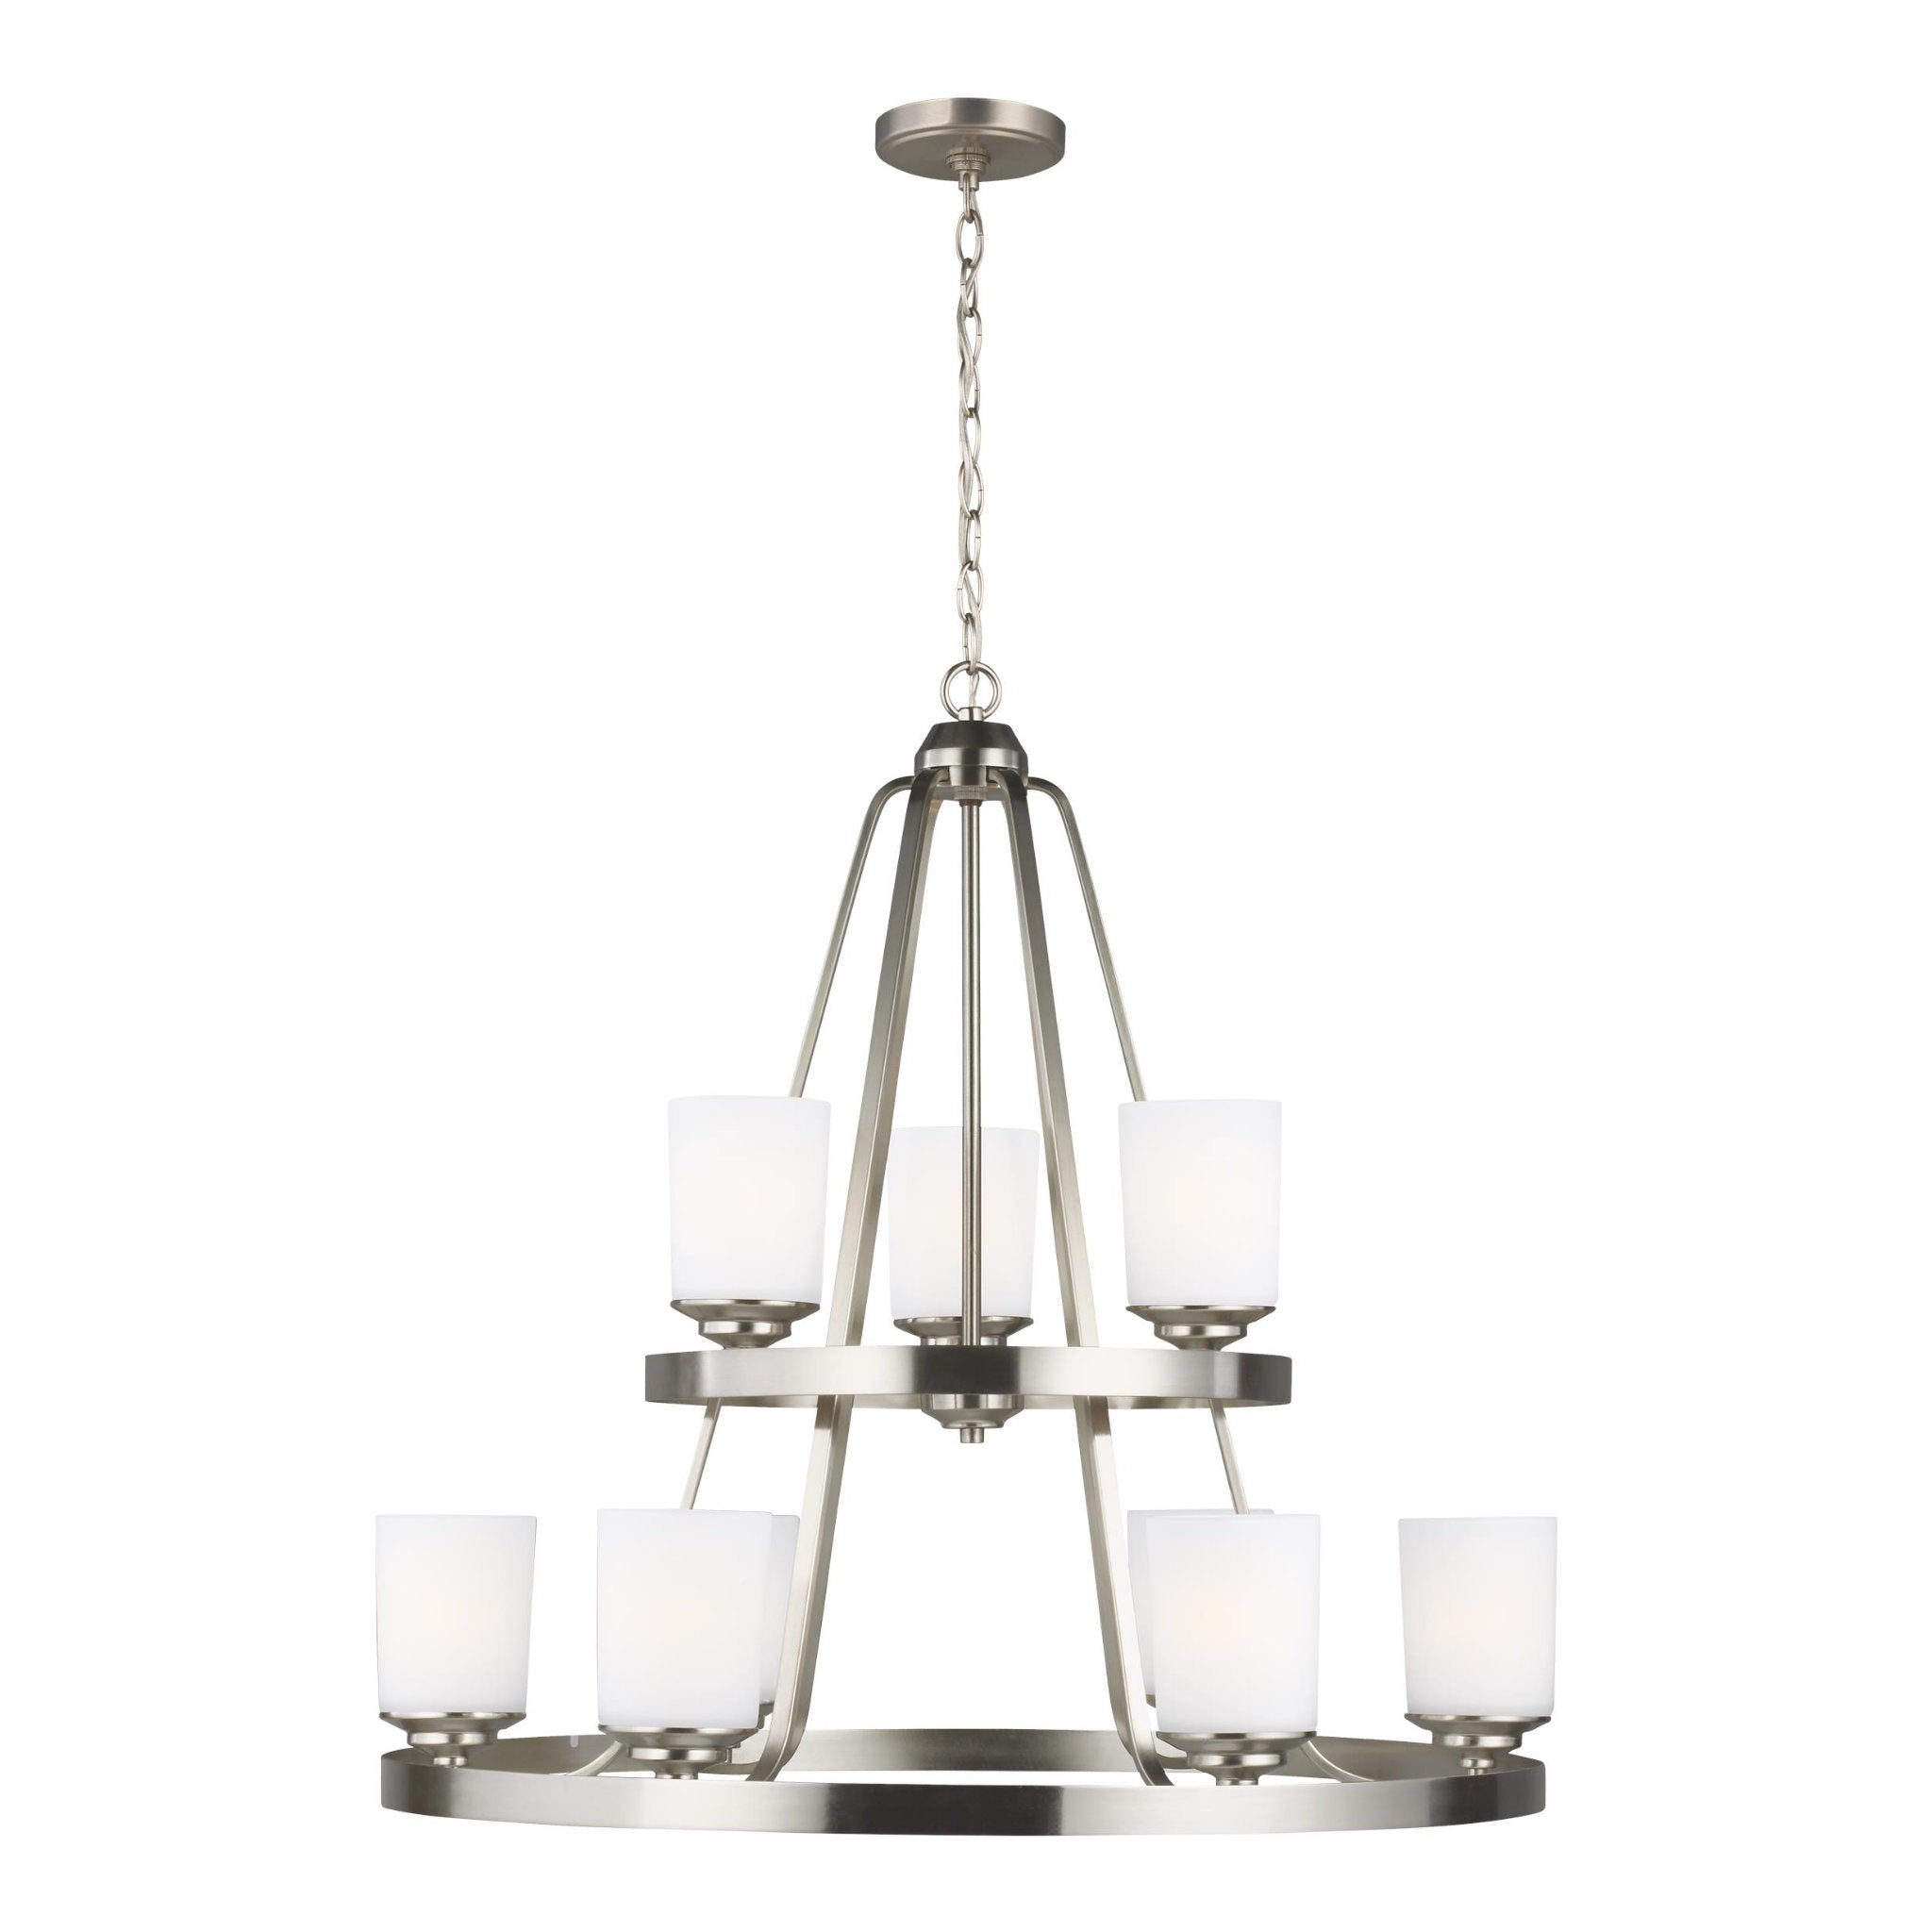 Kemal Nine Light Chandelier LED Transitional 29" Height Steel Round Etched / White Inside Shade in Brushed Nickel